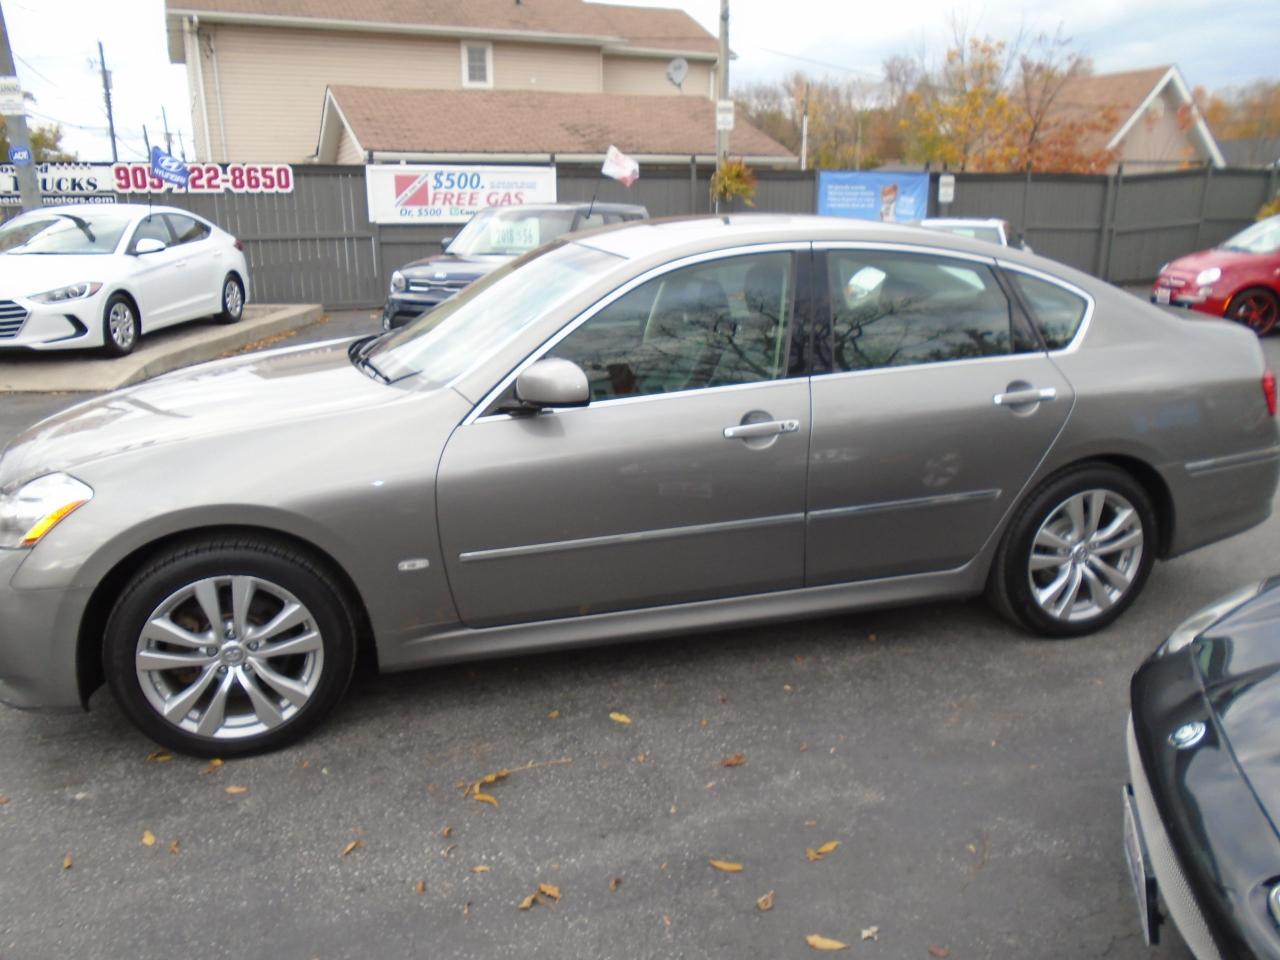 2008 Infiniti M35x Luxury Available in Sutton 905-722-8650 - Photo #2